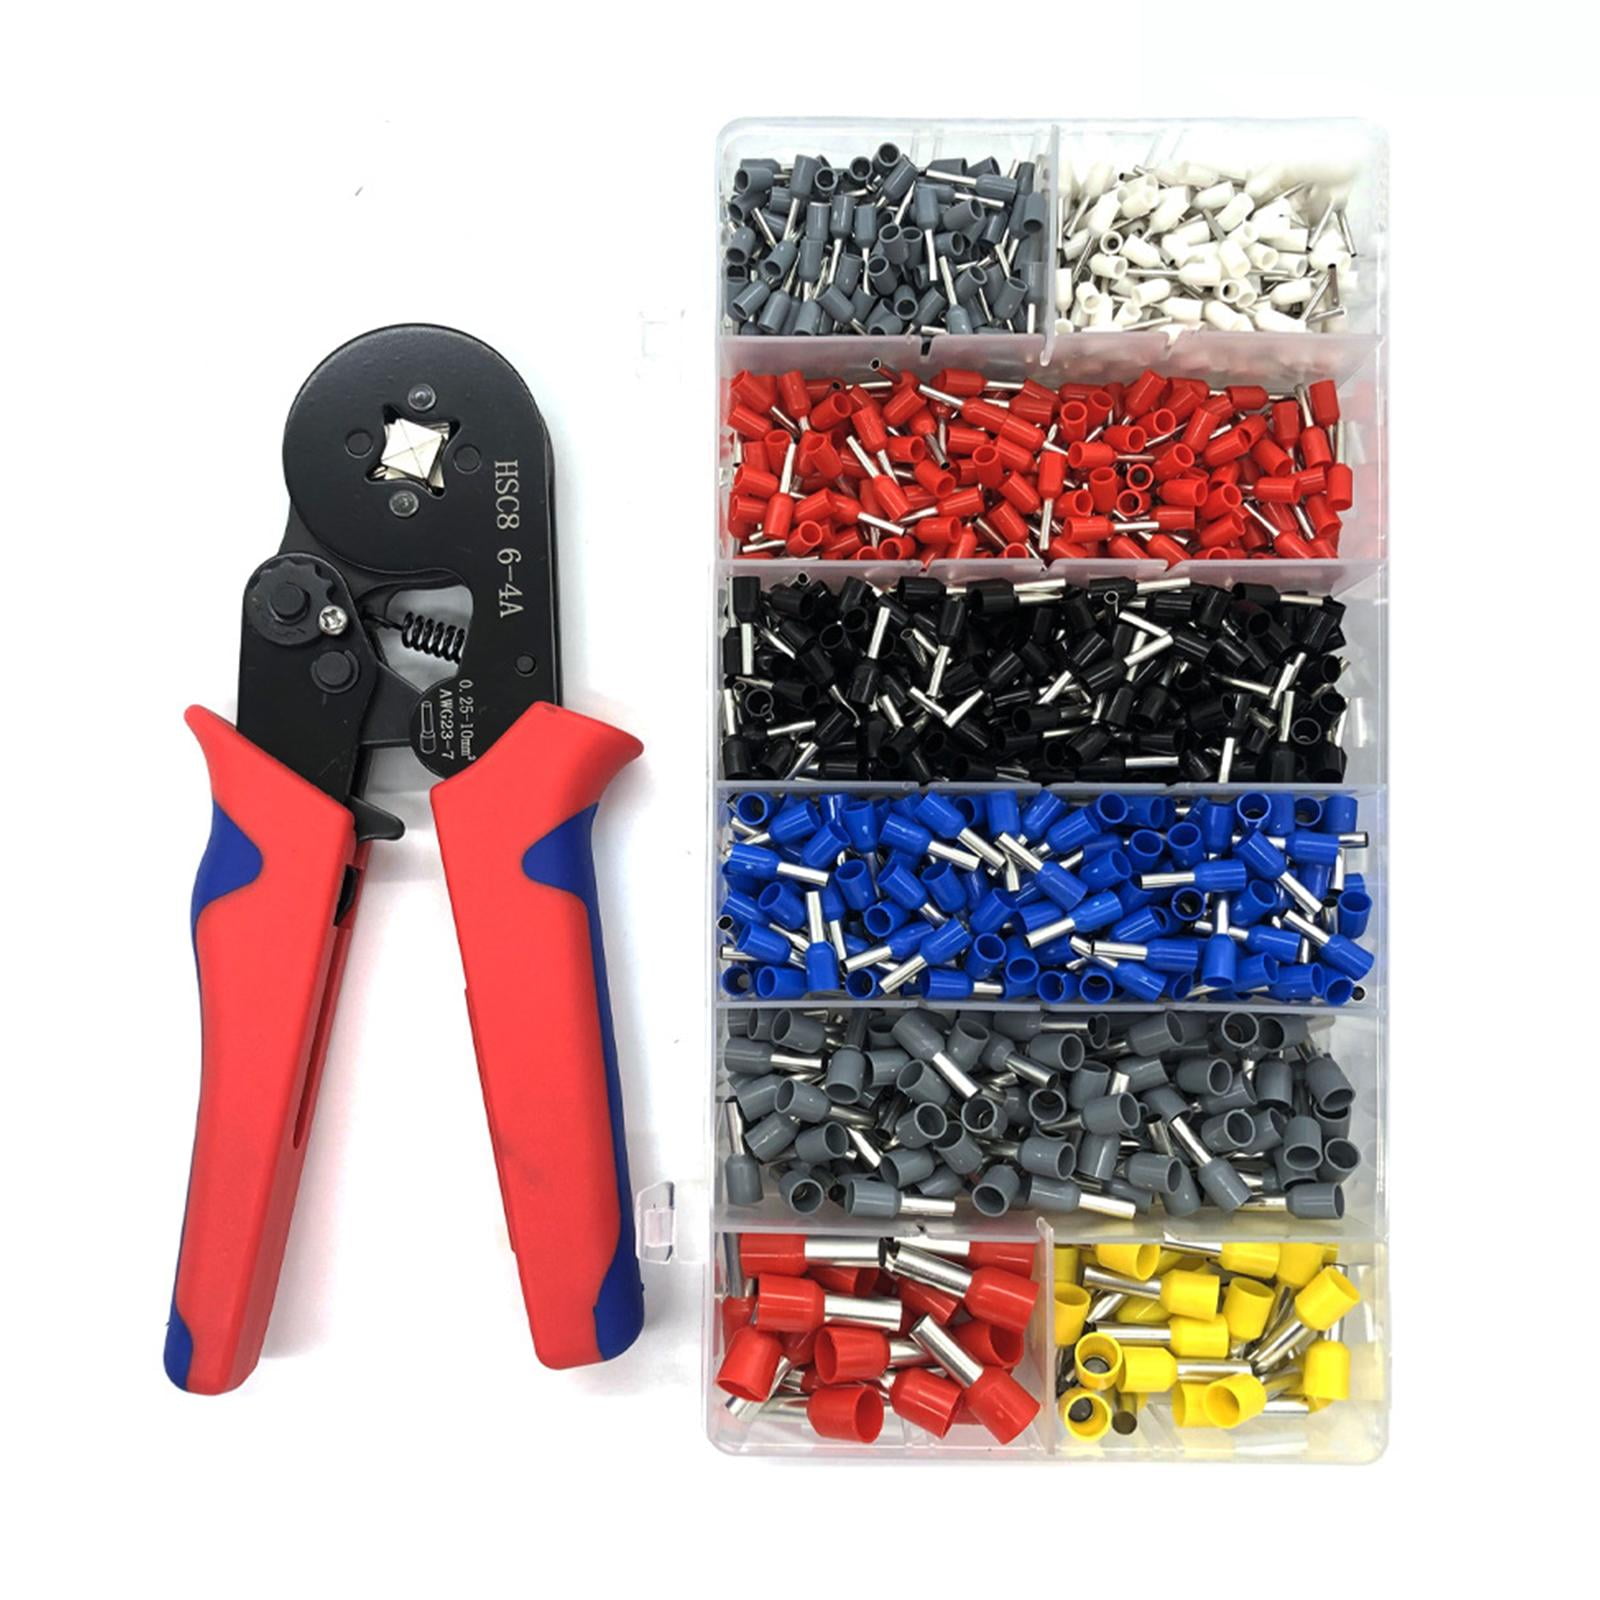 Ferrule Crimping Tools Wire Pliers - 1800 PCS Wire Ferrules with Crimpers  Pliers Kit for Electricians, Adjustable Ratchet Tools with Terminals